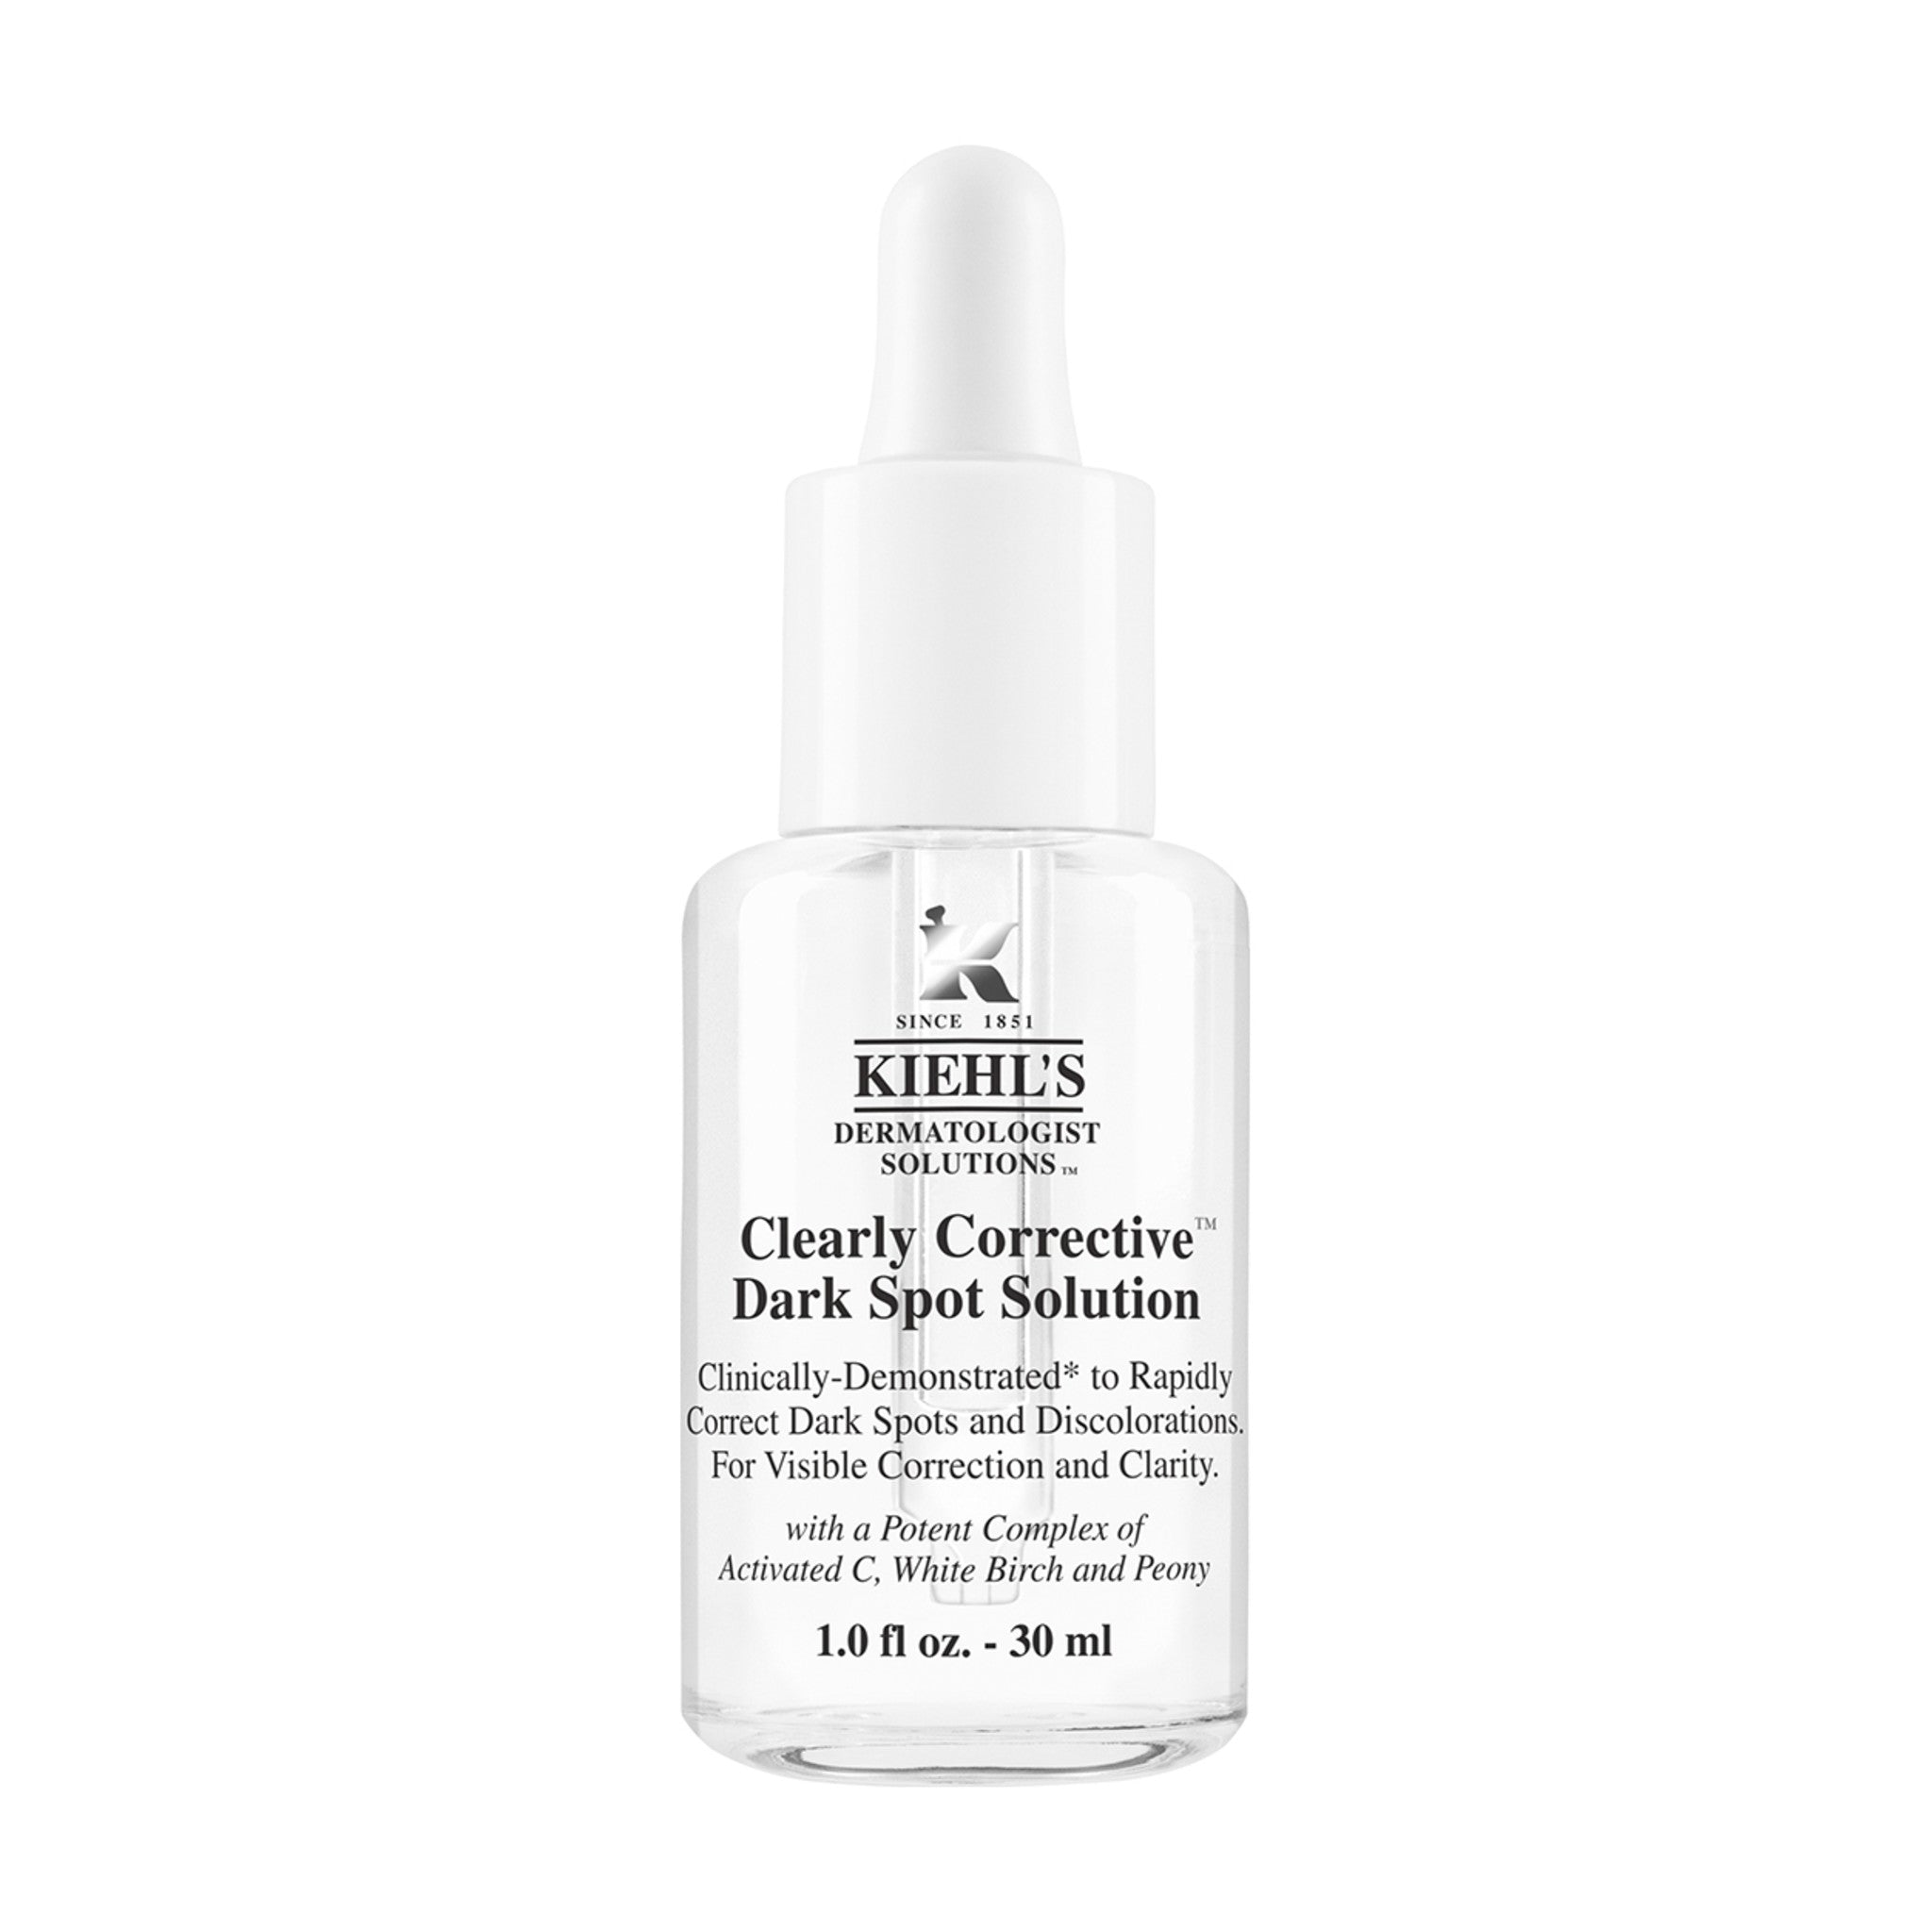 Kiehl's Since 1851 Clearly Corrective Dark Spot Solution Size variant: 1 Oz. main image.